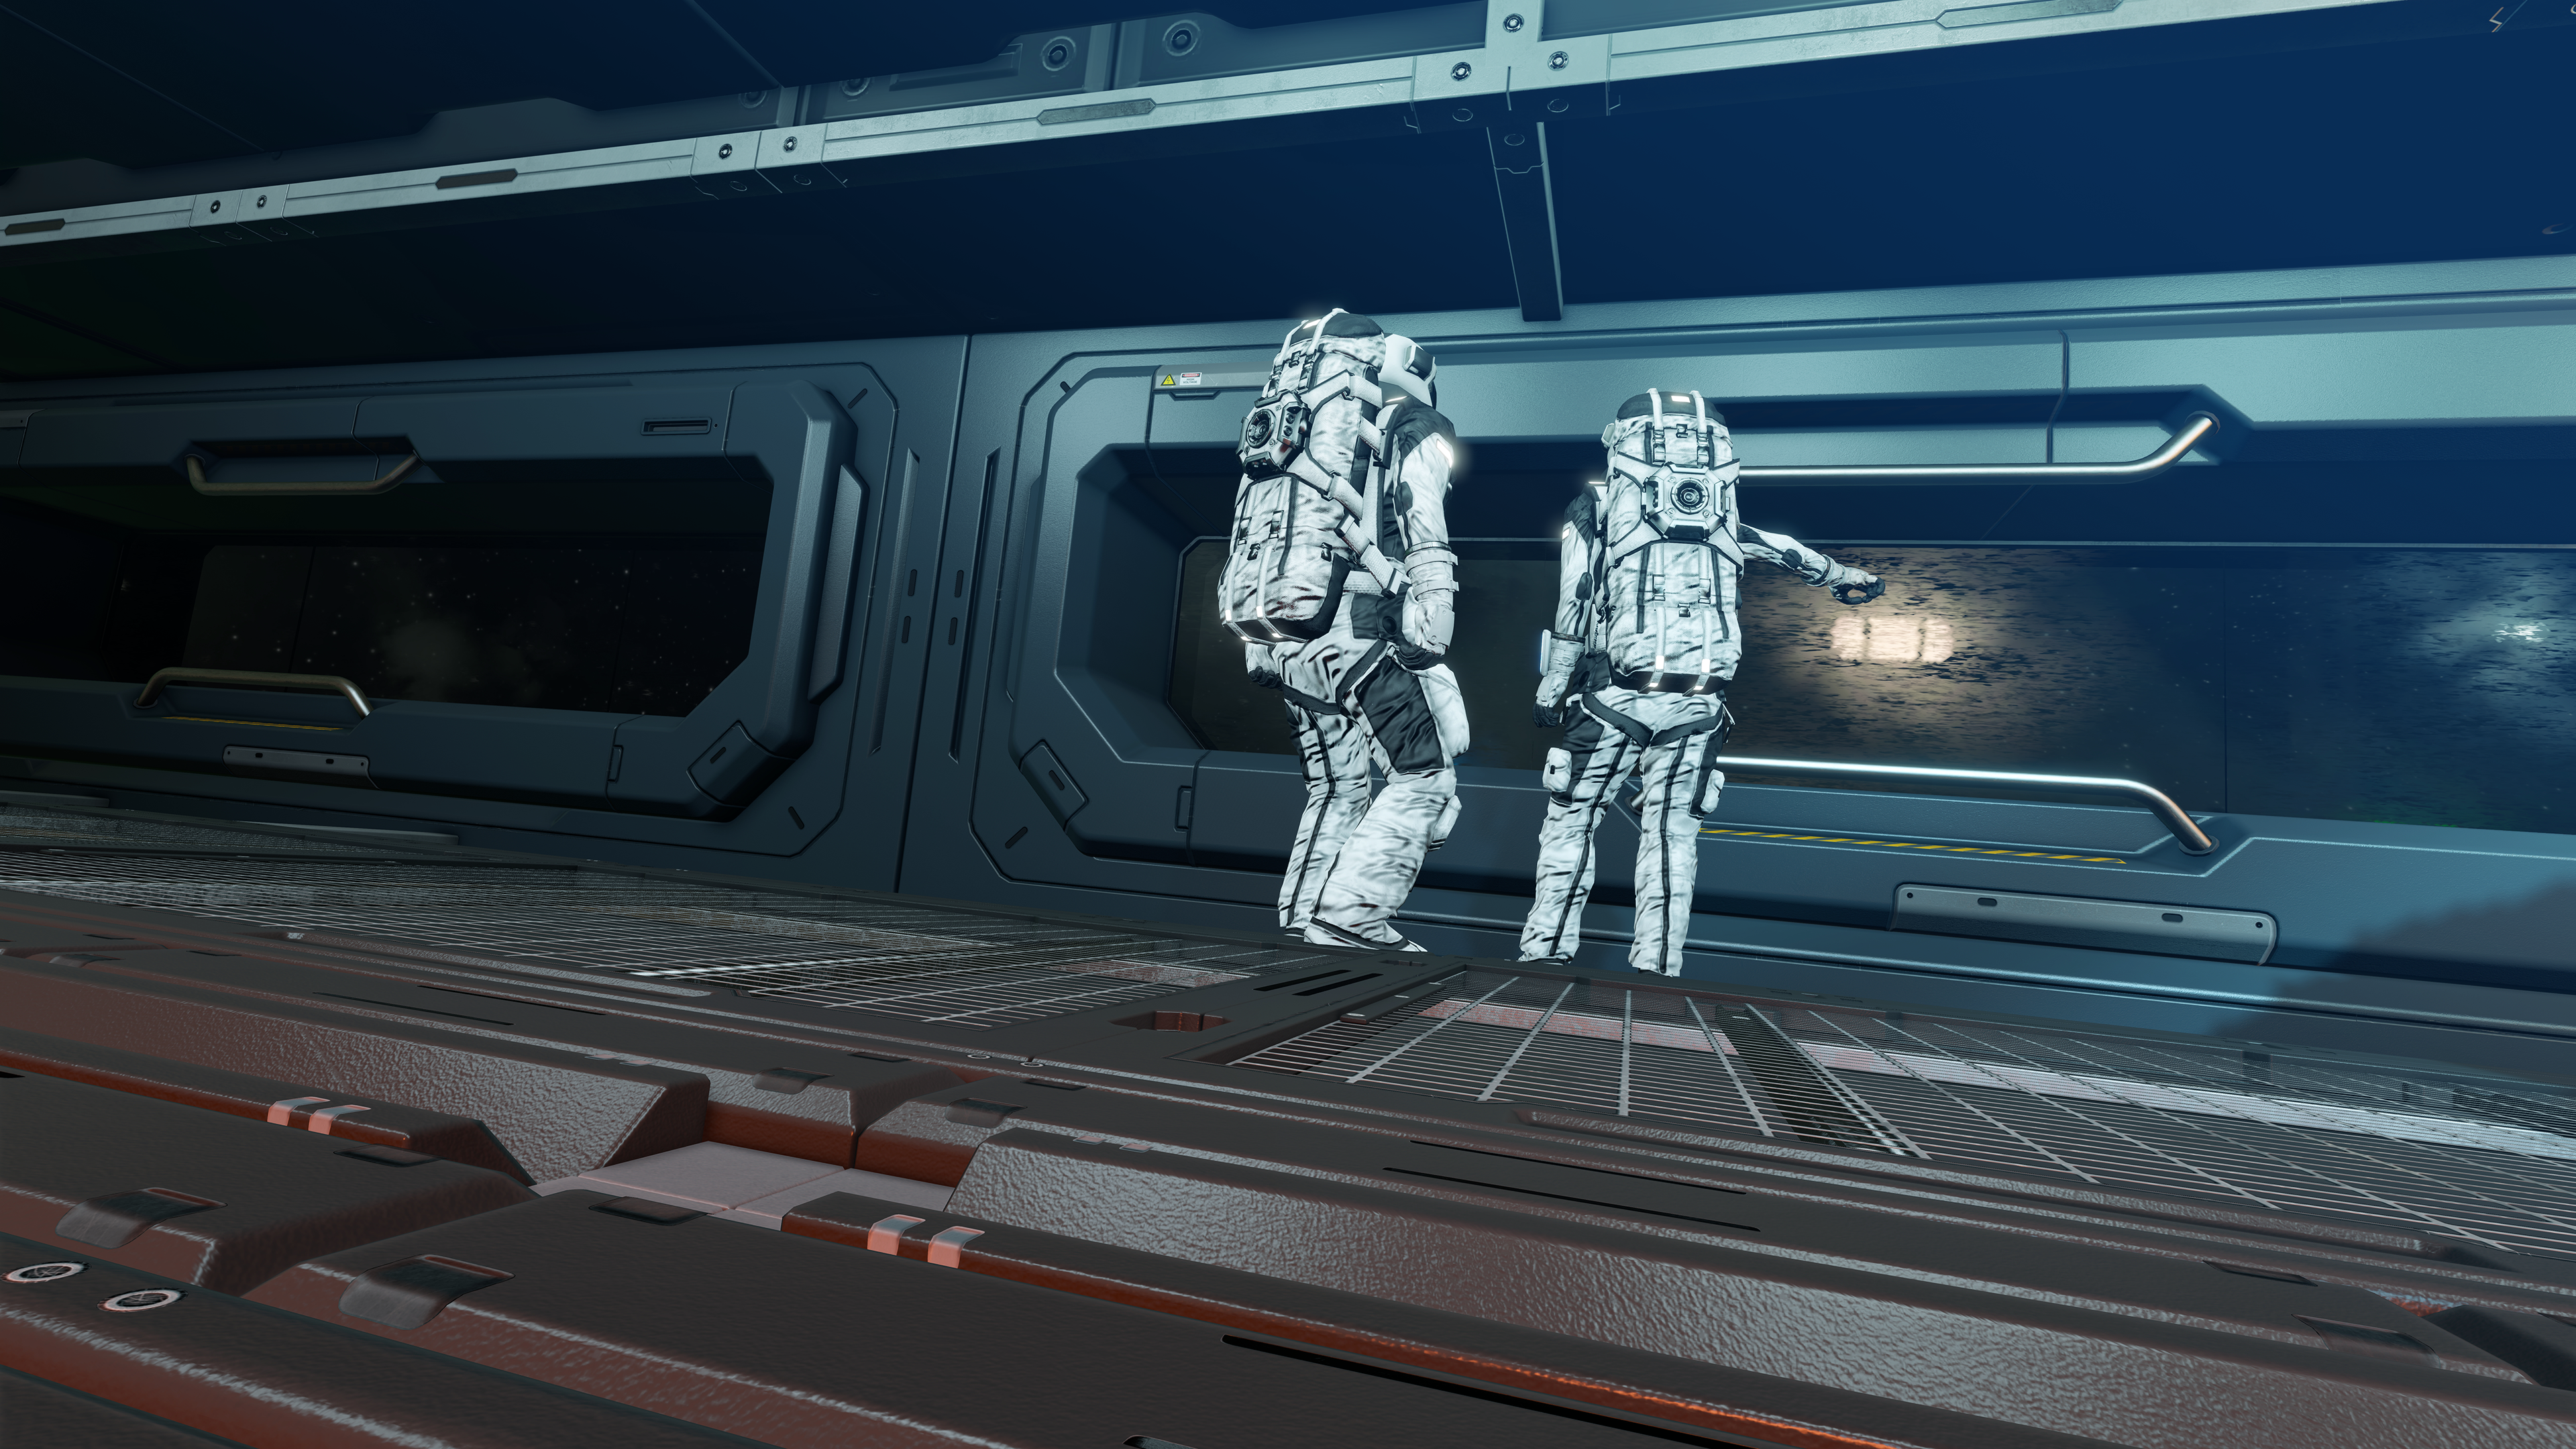 HD desktop wallpaper of space engineers in suits walking through a spaceship corridor, reflecting a futuristic theme perfect for a background.